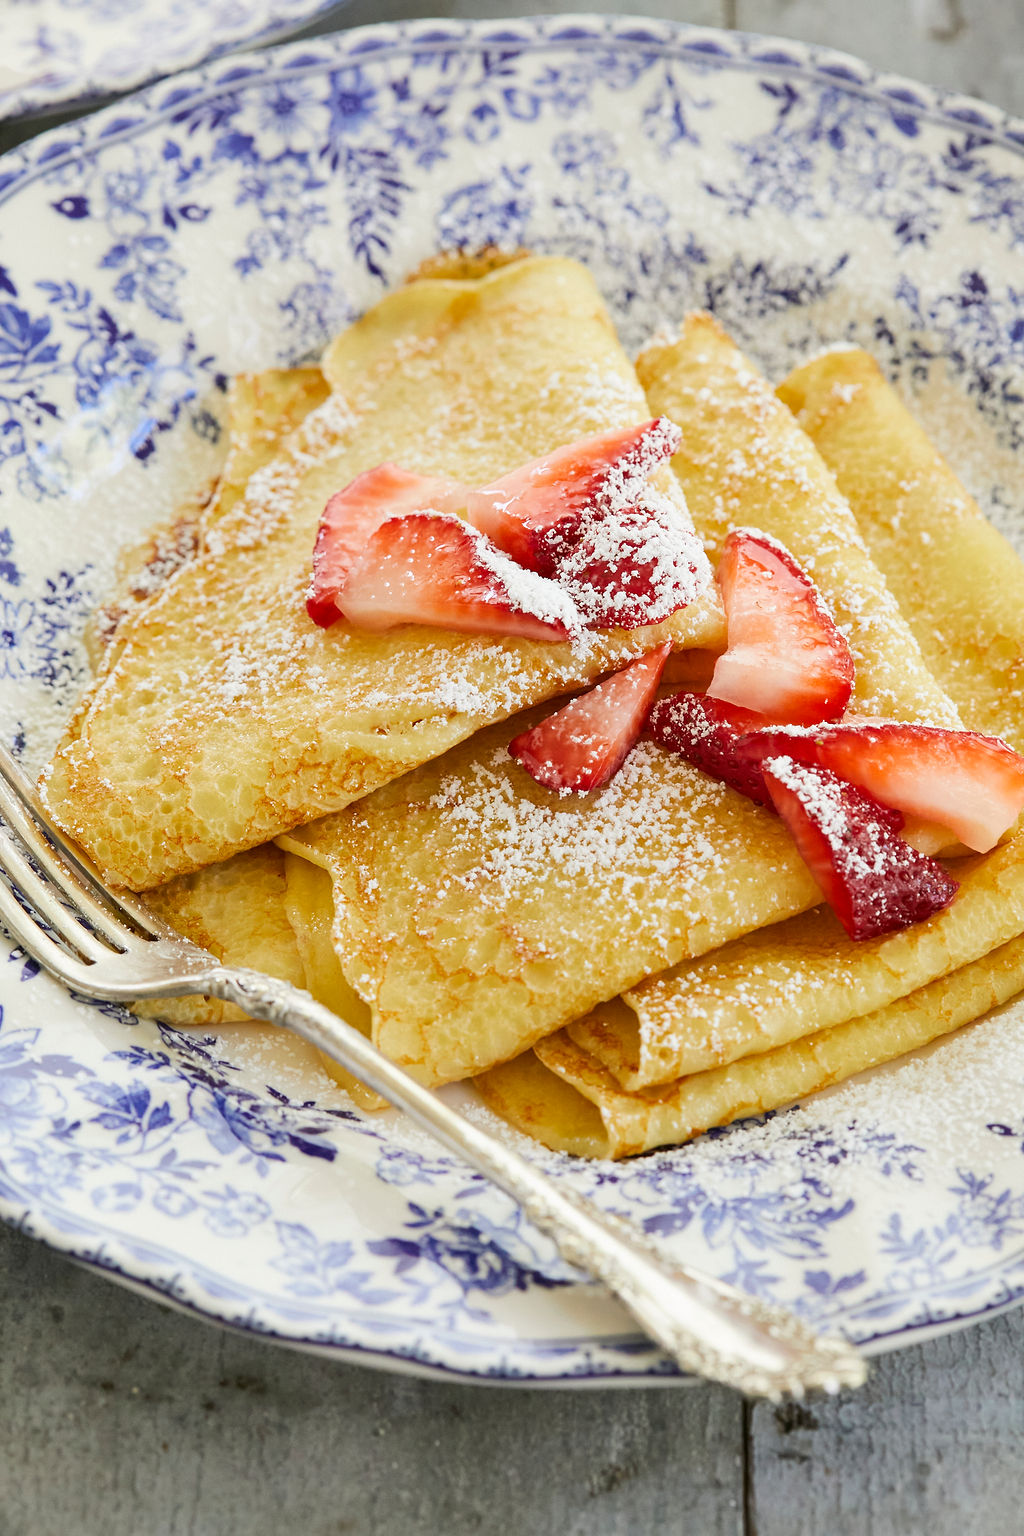 A close-up of my folded crepes to show texture and consistency, topped with powdered sugar and berries.